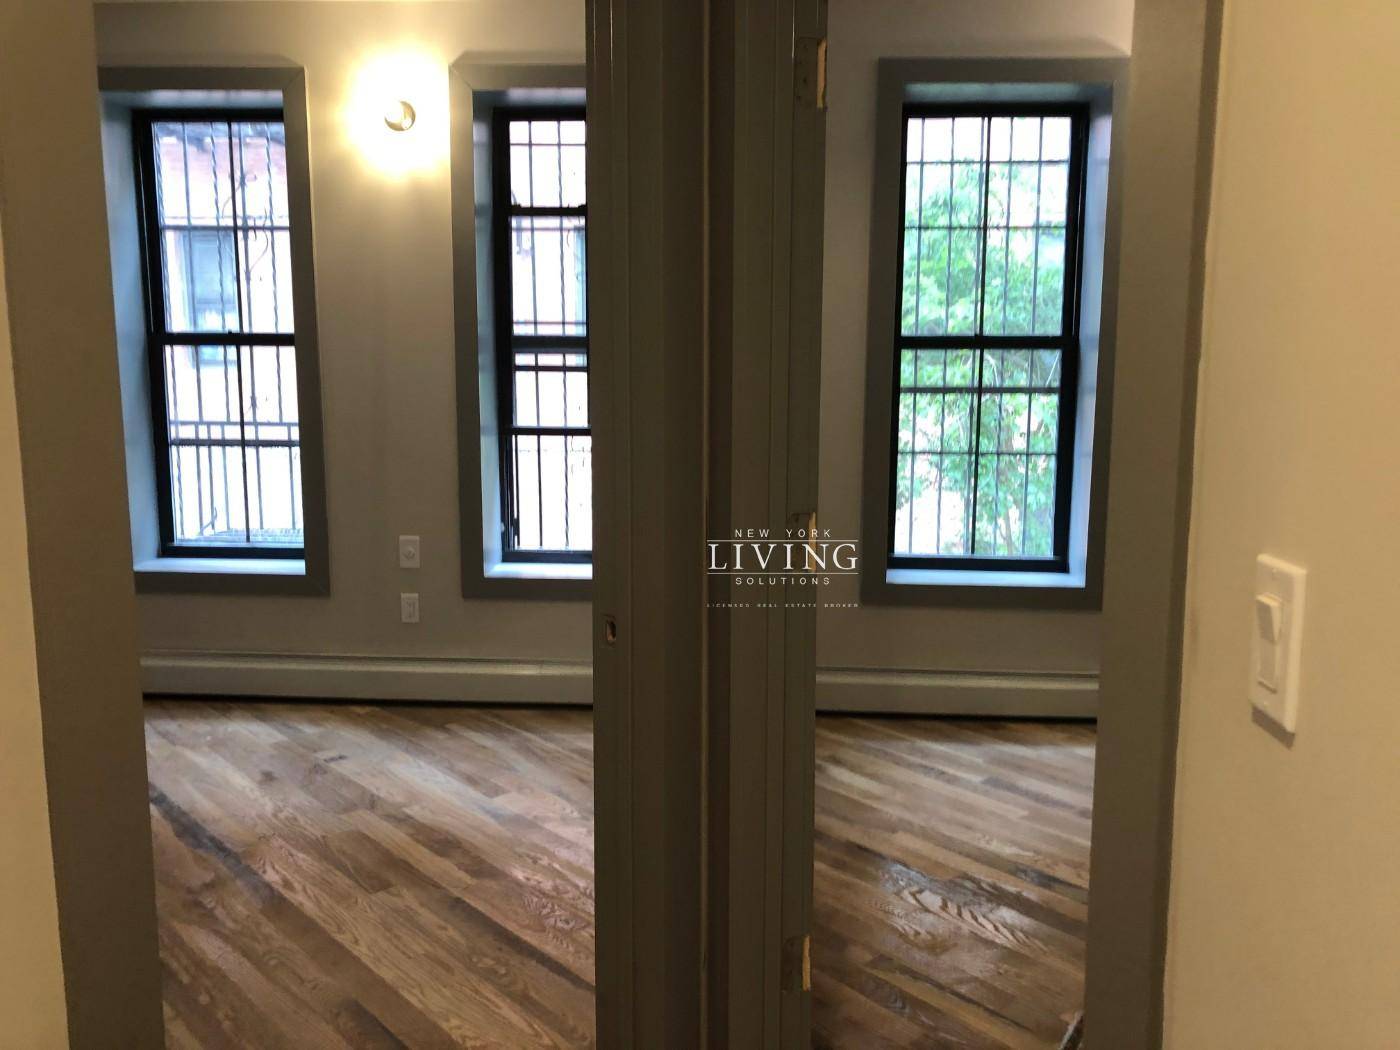 EAST NEW YORK NEW RENOVATED BUILDING 1 ST FLOOR UNIT WASHER AND DRYER IN BASEMENT STUINNING AND PRISTINE NEW OPEN LAYOUT KITCHEN 3 BEDROOMS 1 MODERN STYKE TILED BATHROOMLIVING ROOM ...